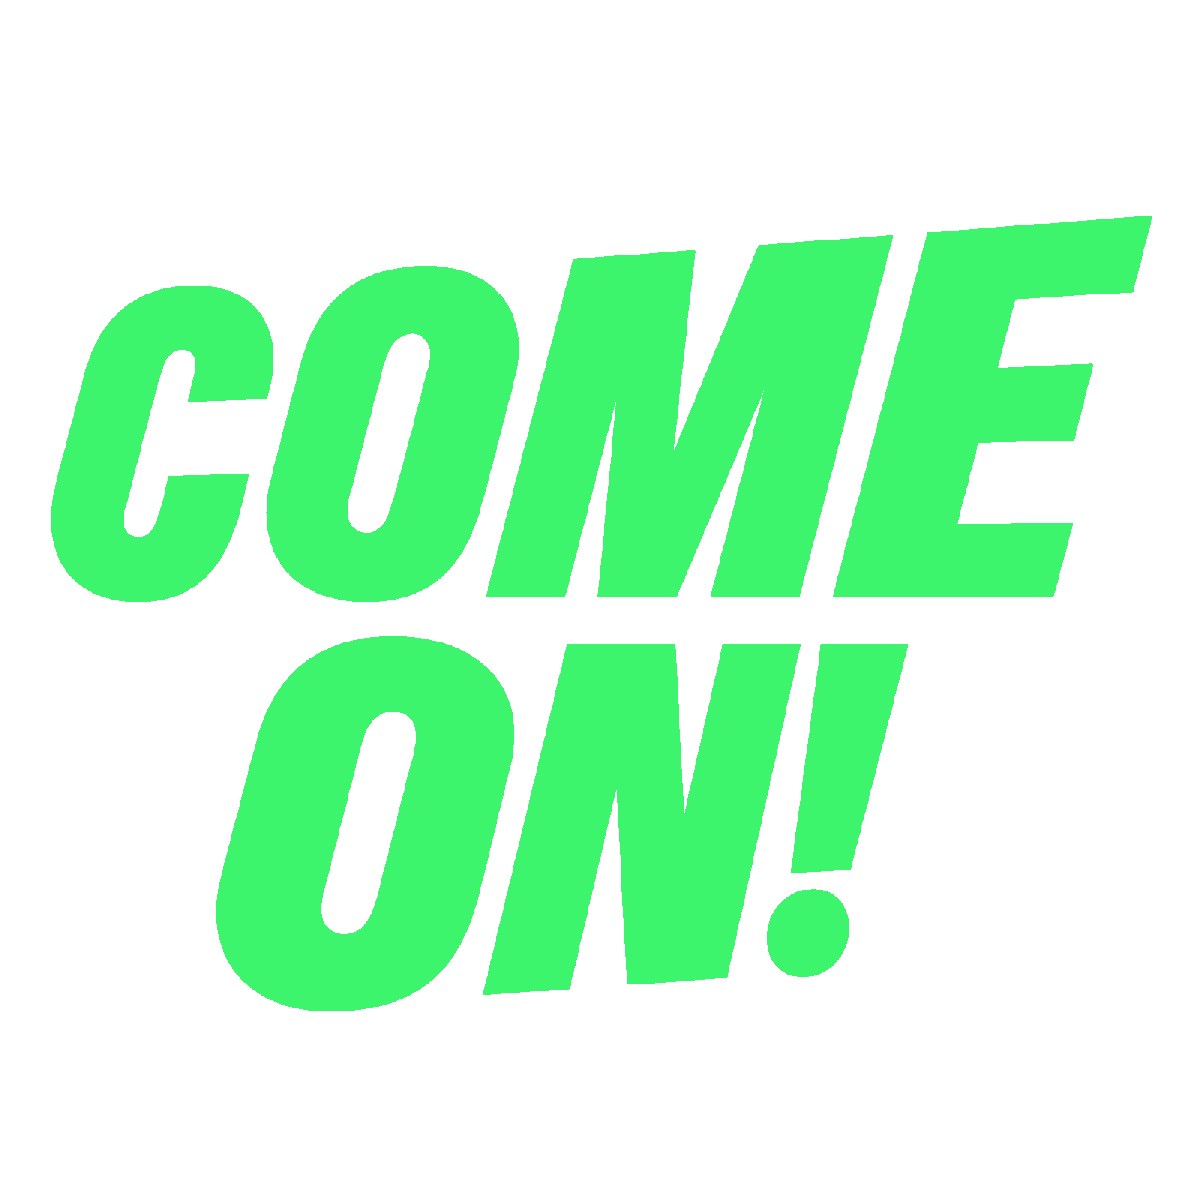 come-on-logo-png-1200x1200s